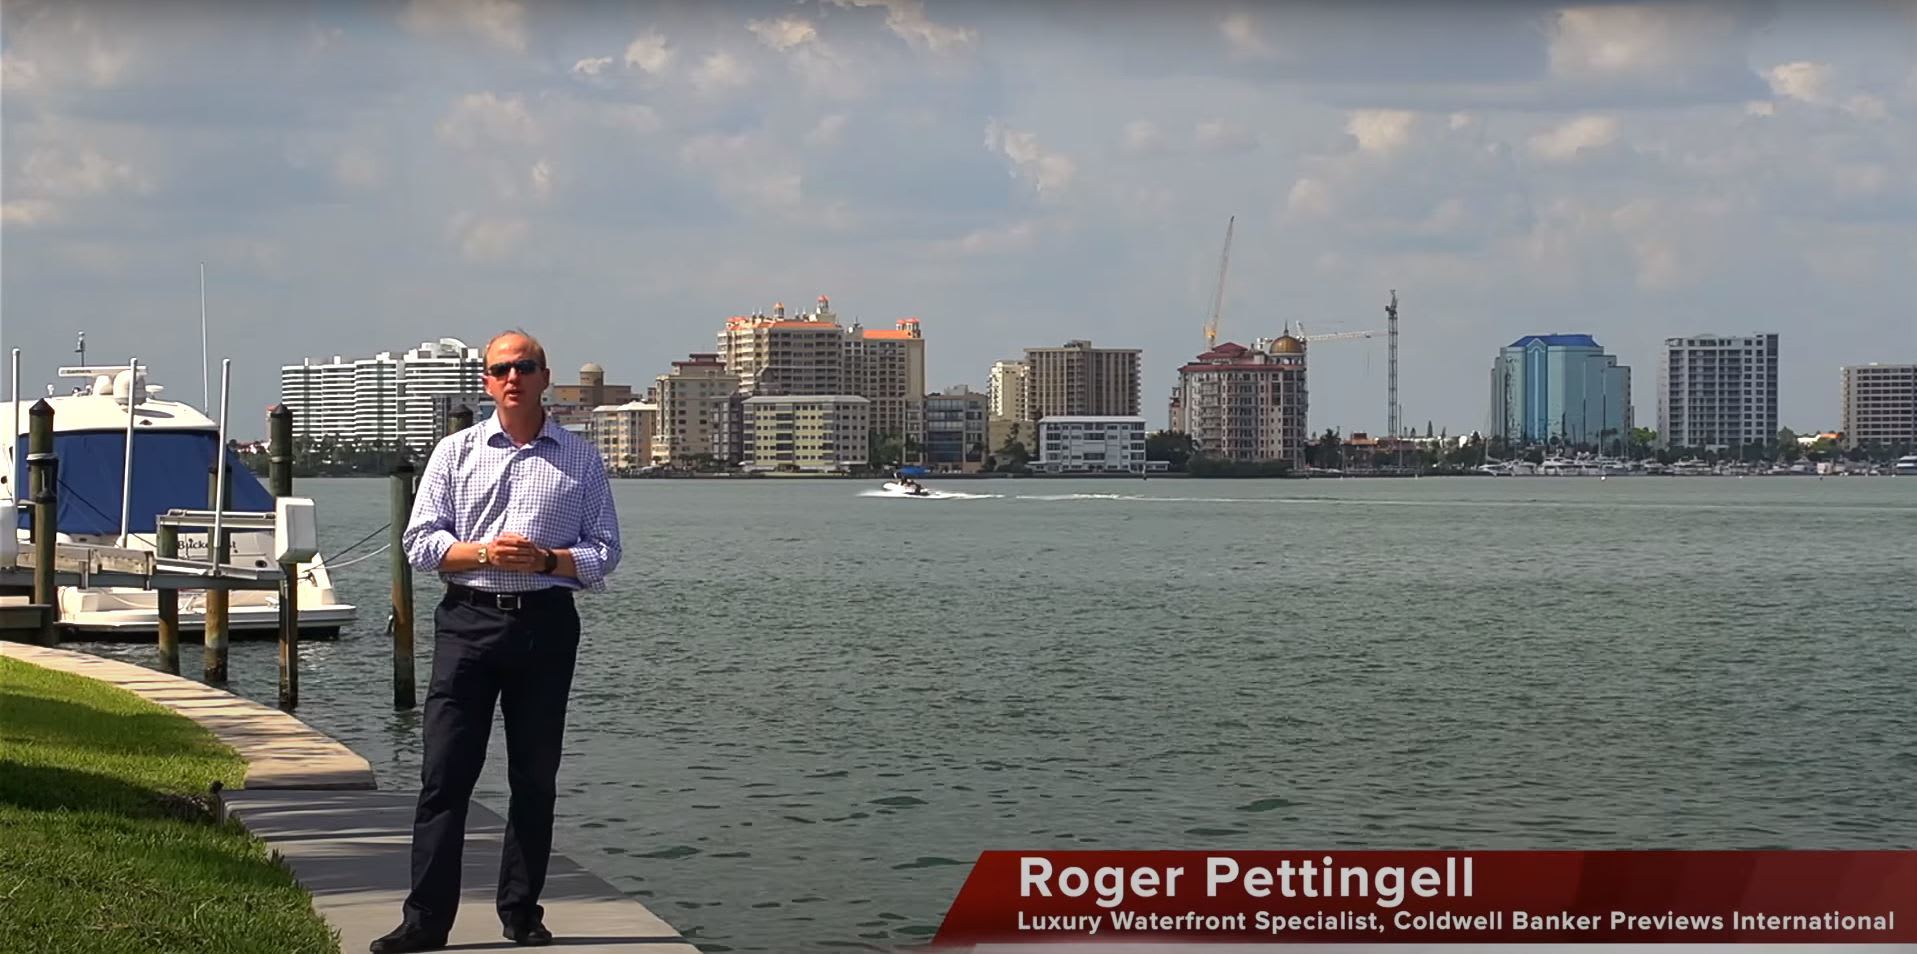 A Look At Waterfront Property Pricing In Sarasota By Roger Pettingell In REALTALK™ #50